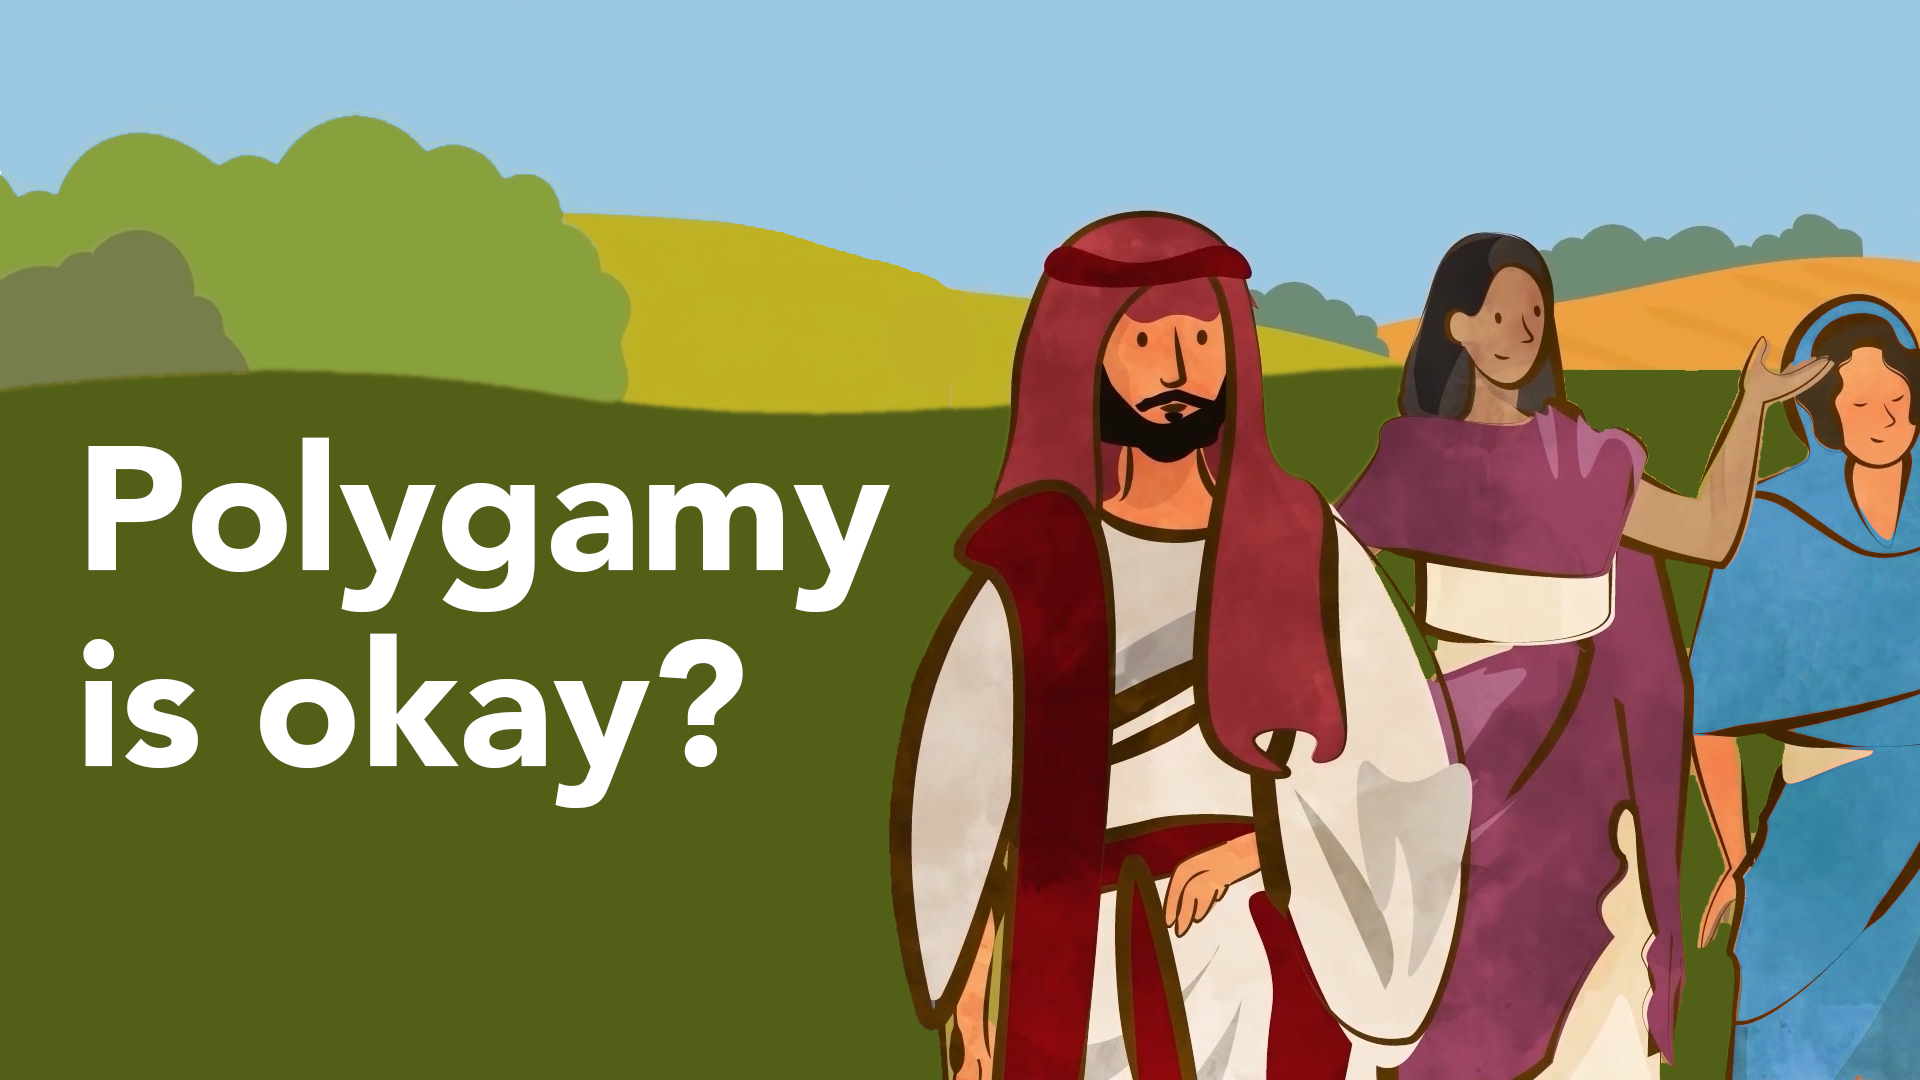 What Does the Bible Say About Polygamy?